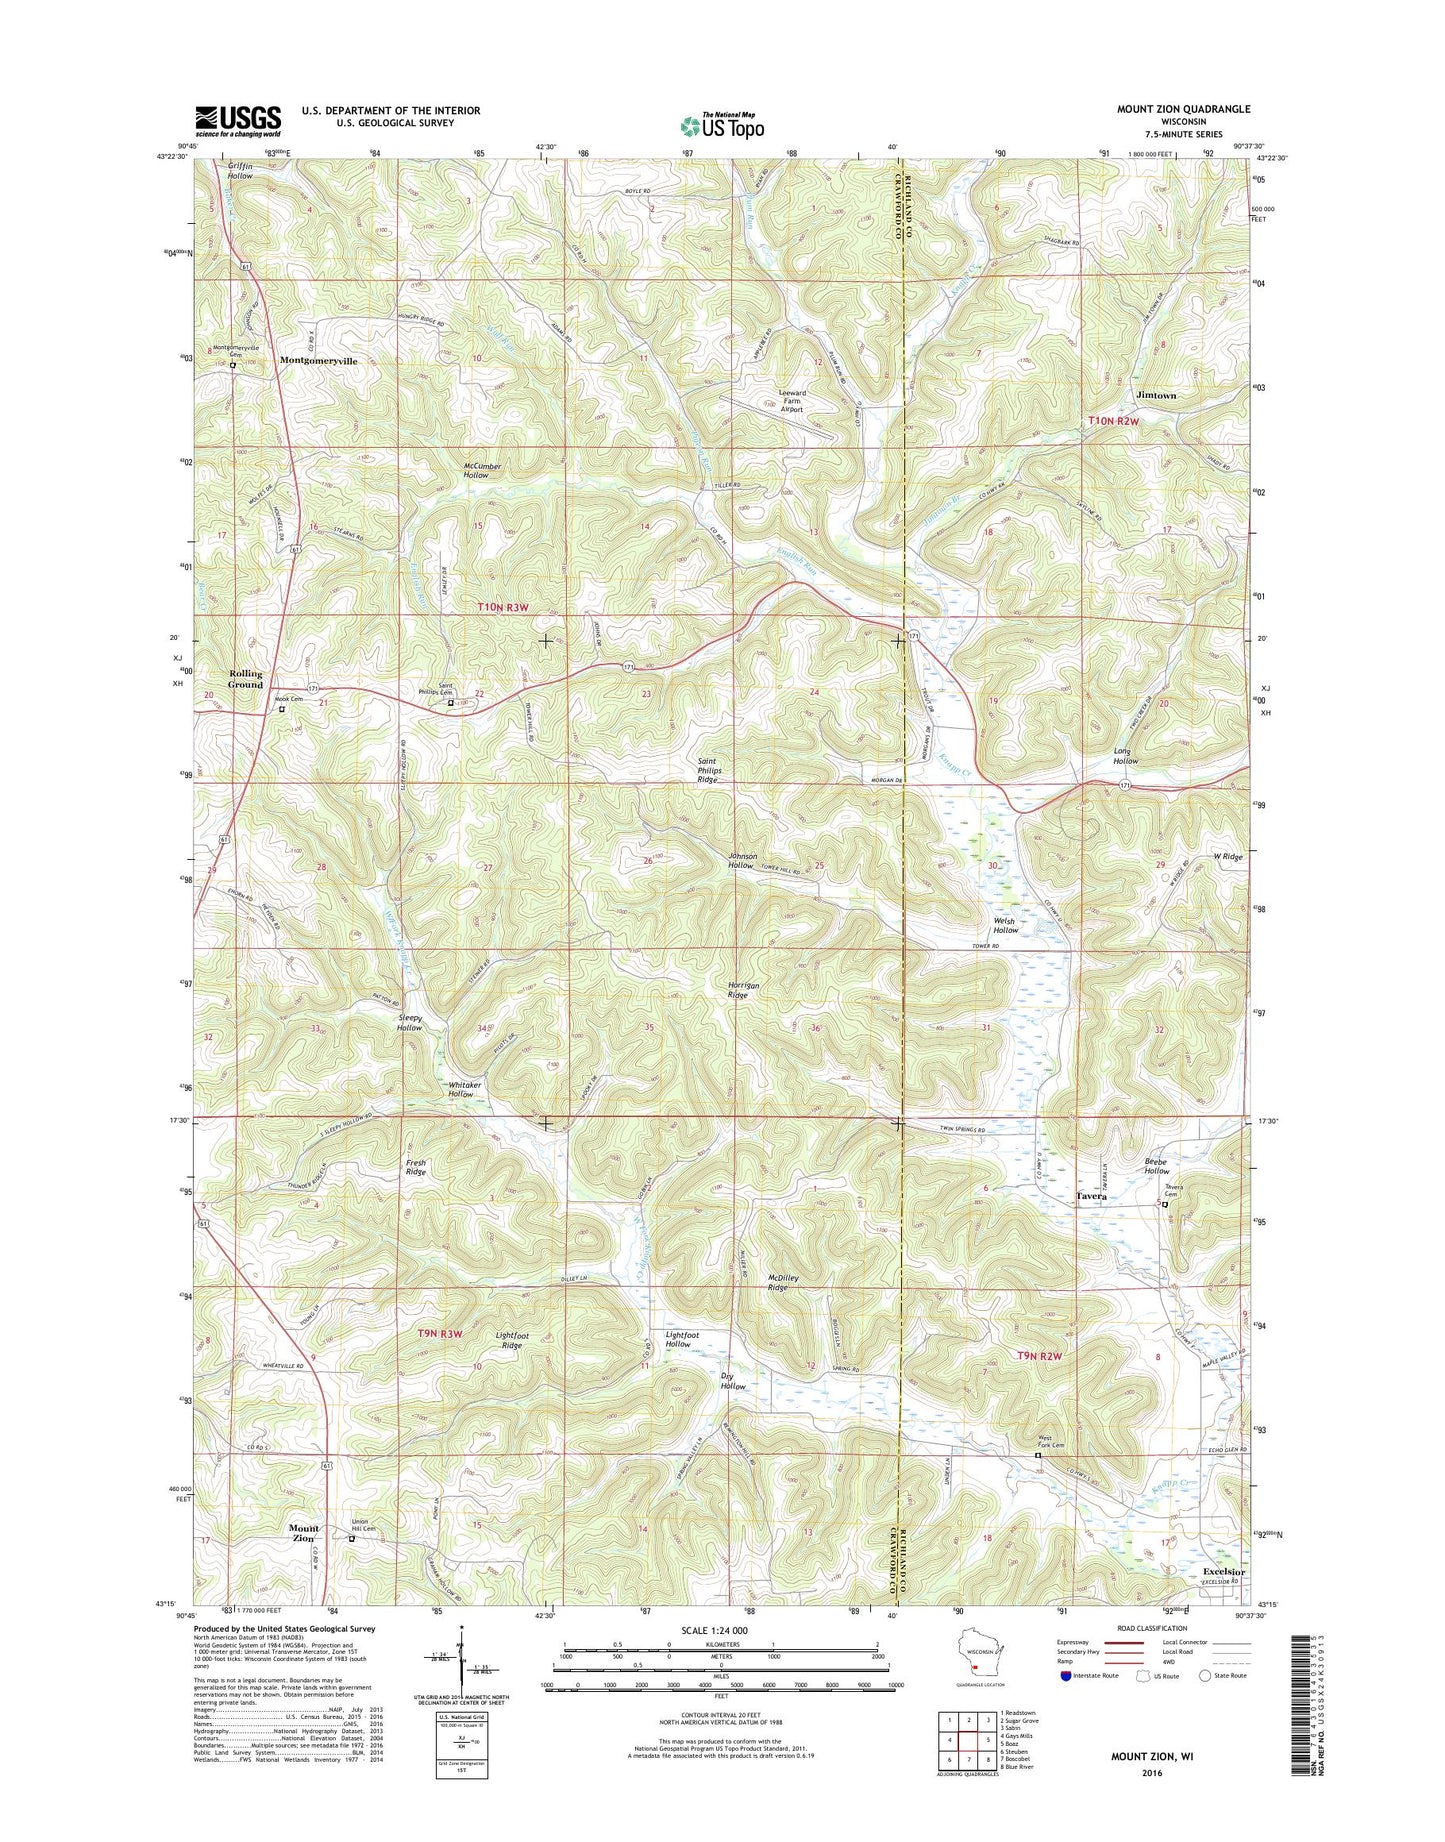 Mount Zion Wisconsin US Topo Map Image